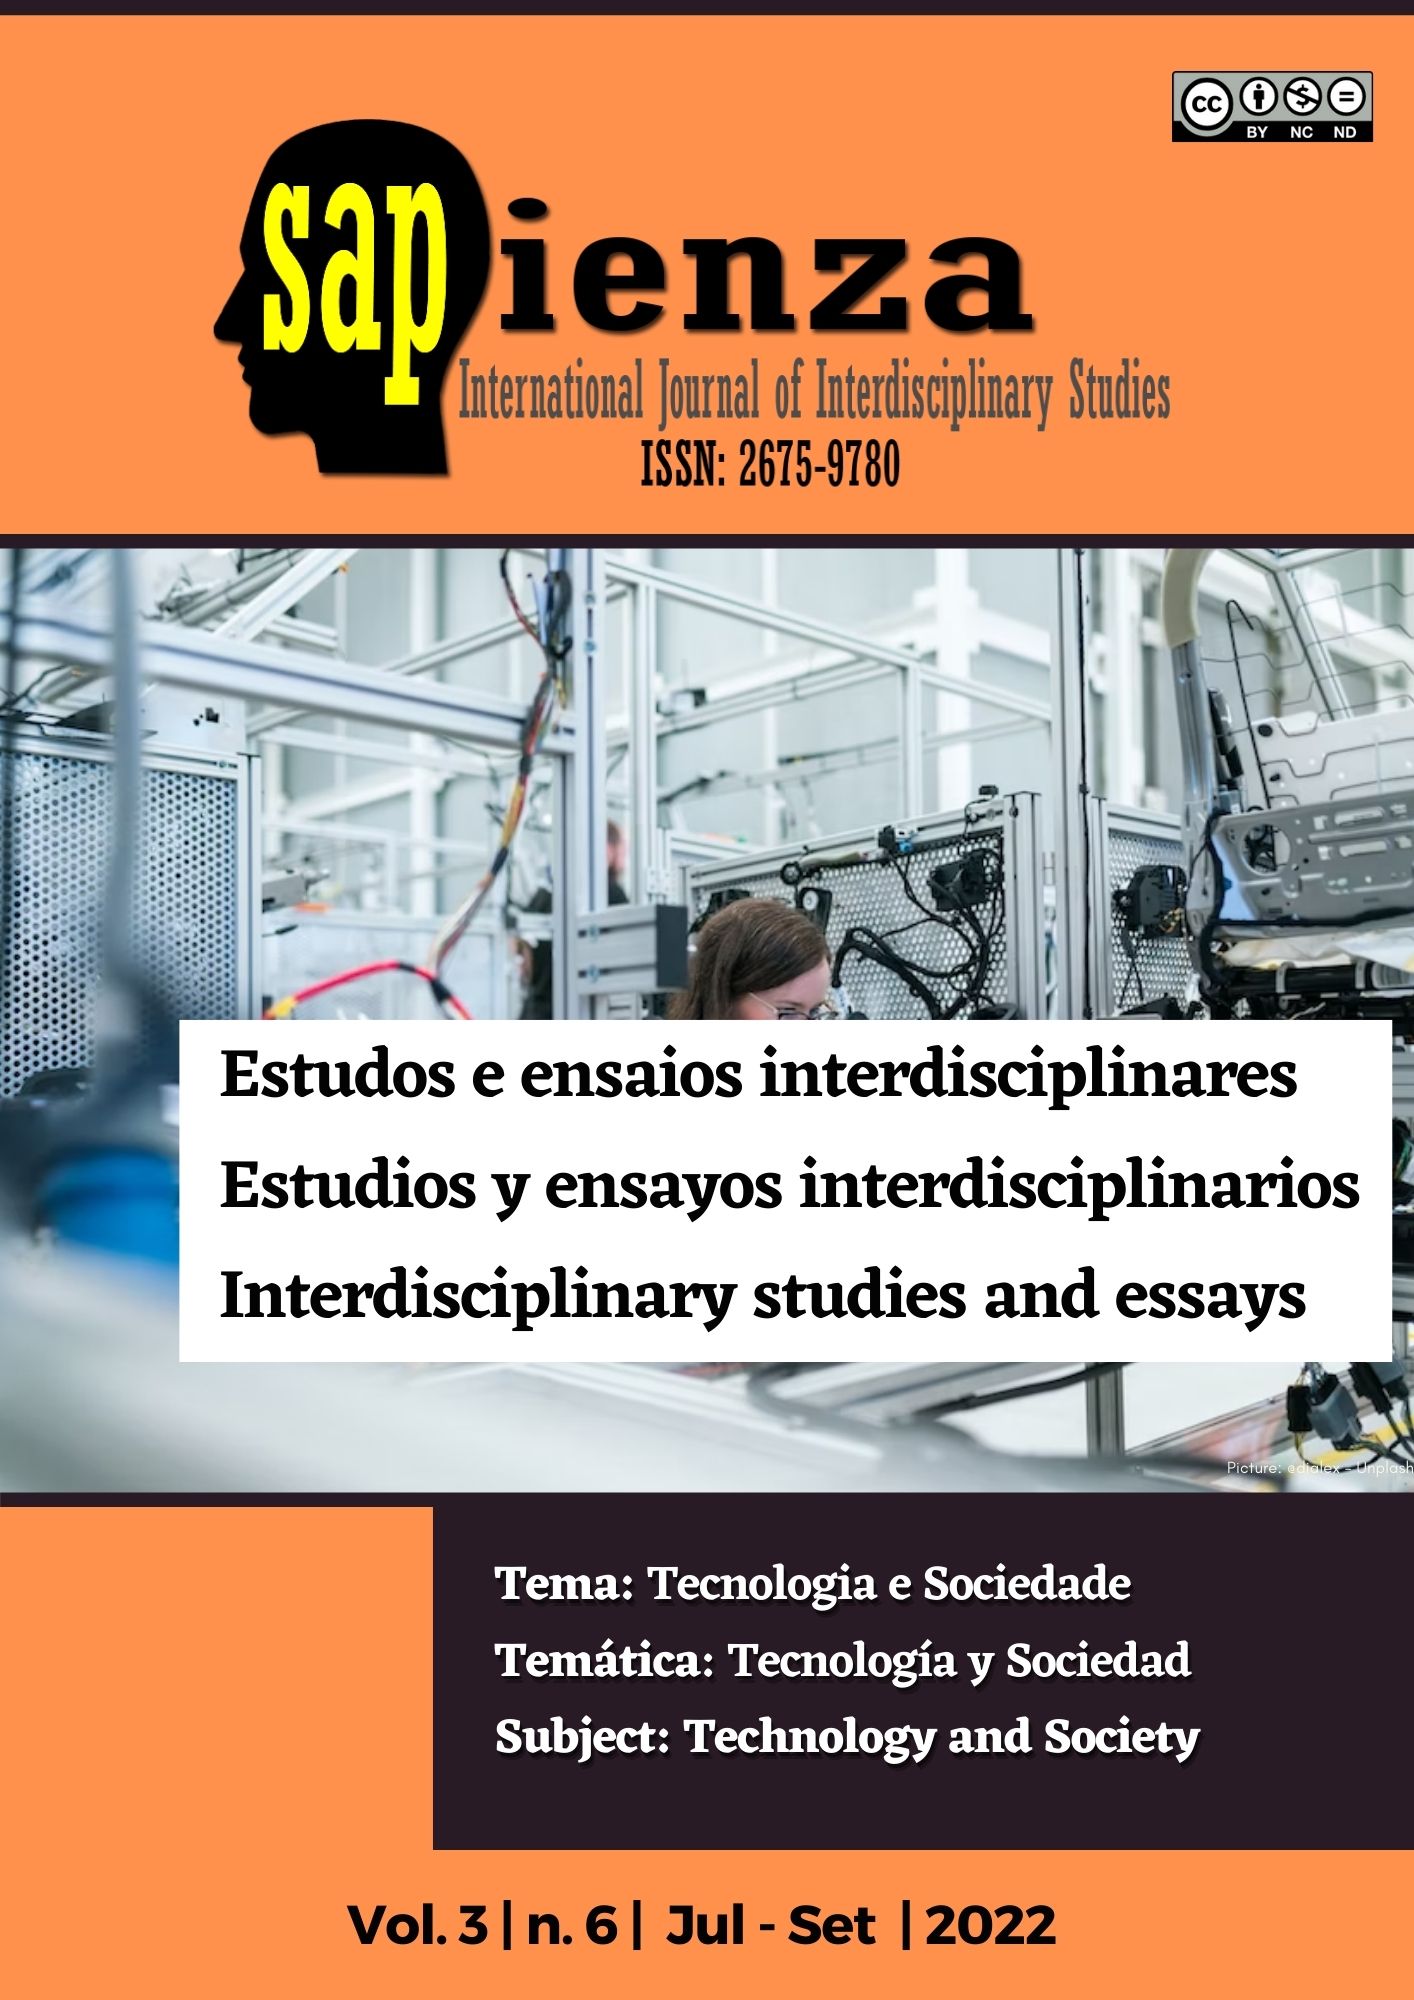 					View Vol. 3 No. 6 (2022): Interdisciplinary contributions in technology and society
				